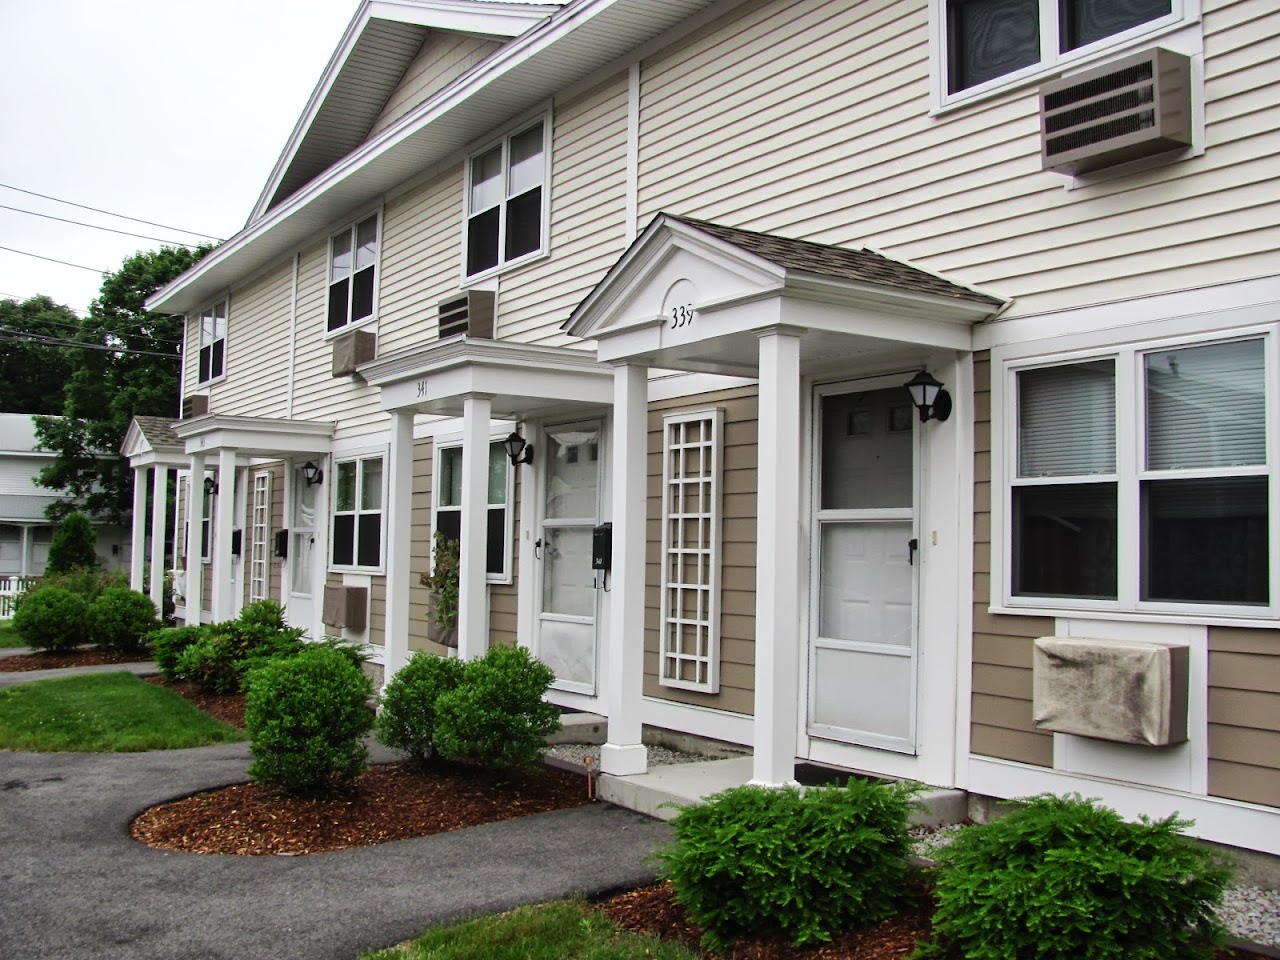 Photo of GEORGETOWNE HOMES 1B. Affordable housing located at 400A GEORGETOWNE DRIVE BOSTON, MA 02136